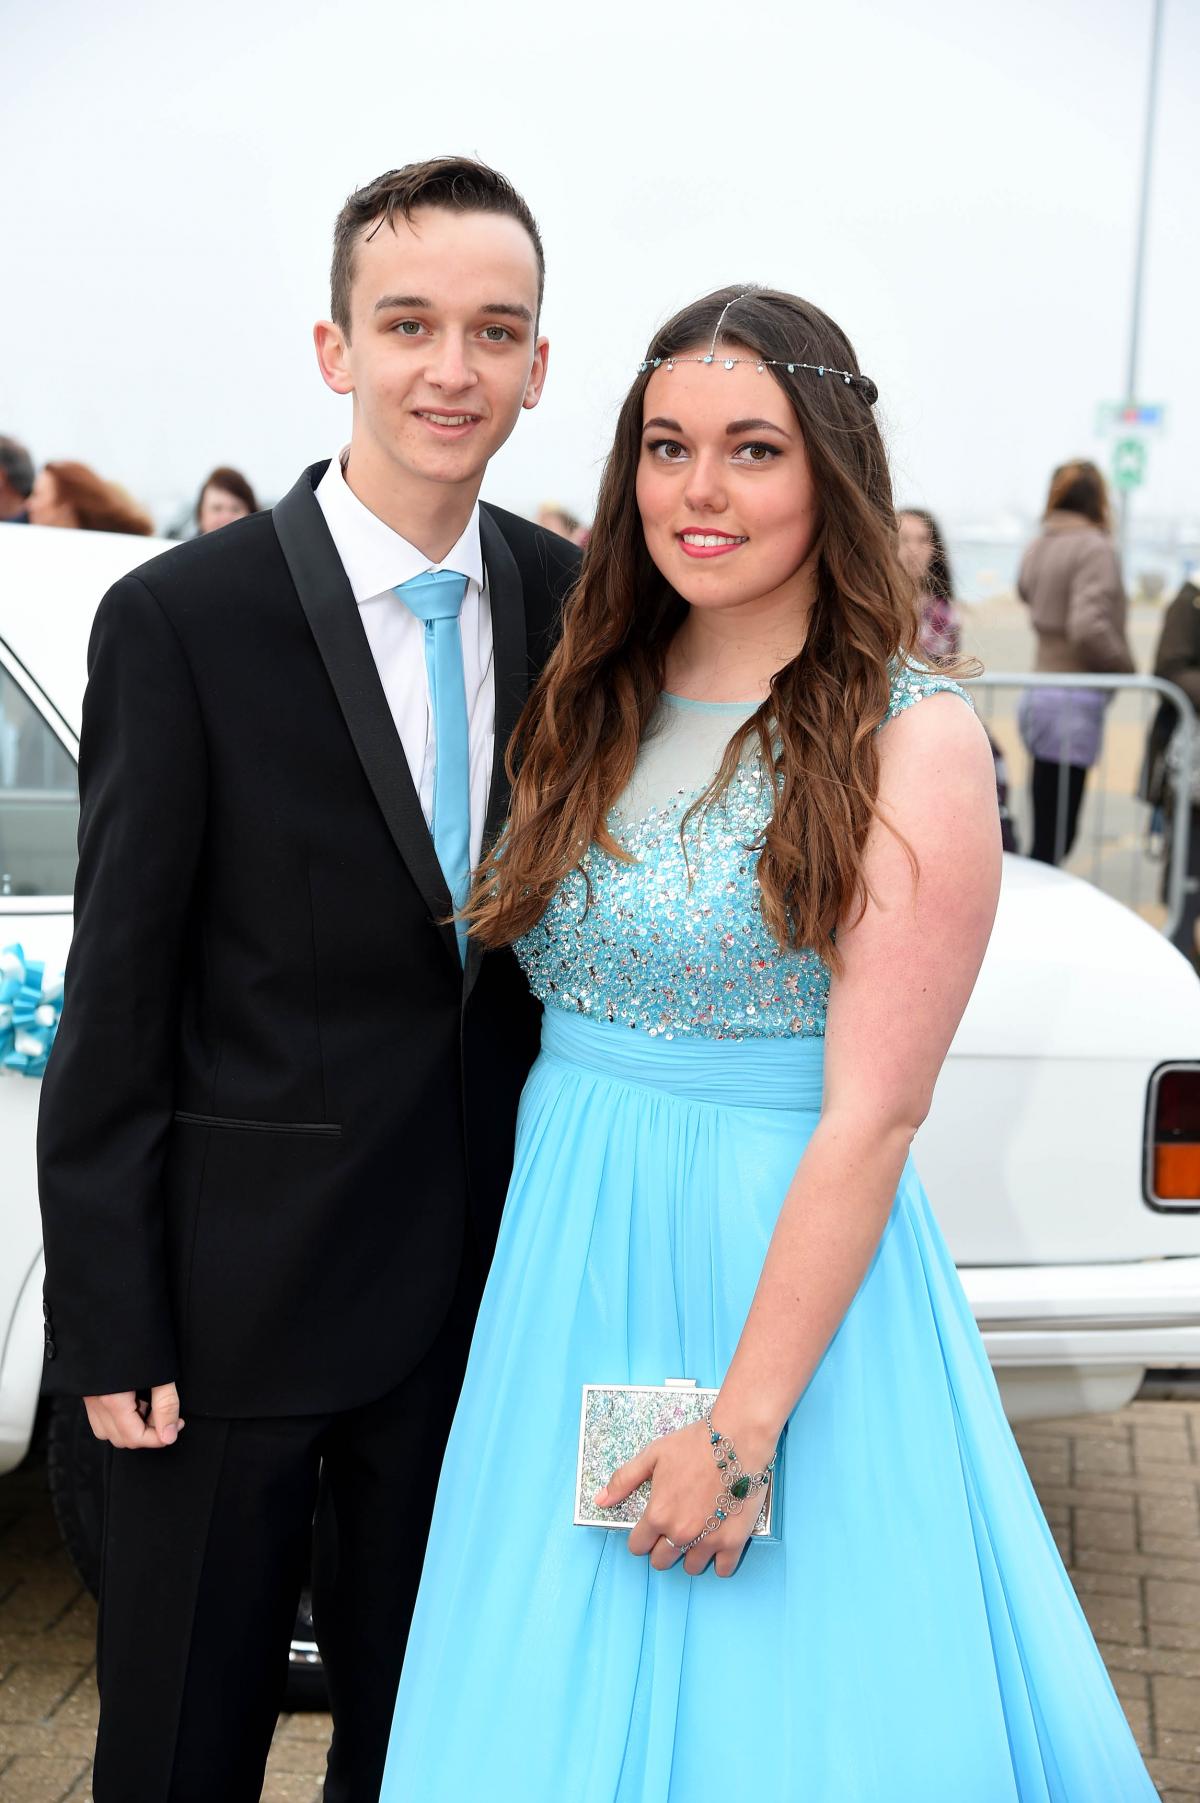 IPACA 2015 Prom - Pictures by Finnbarr Webster